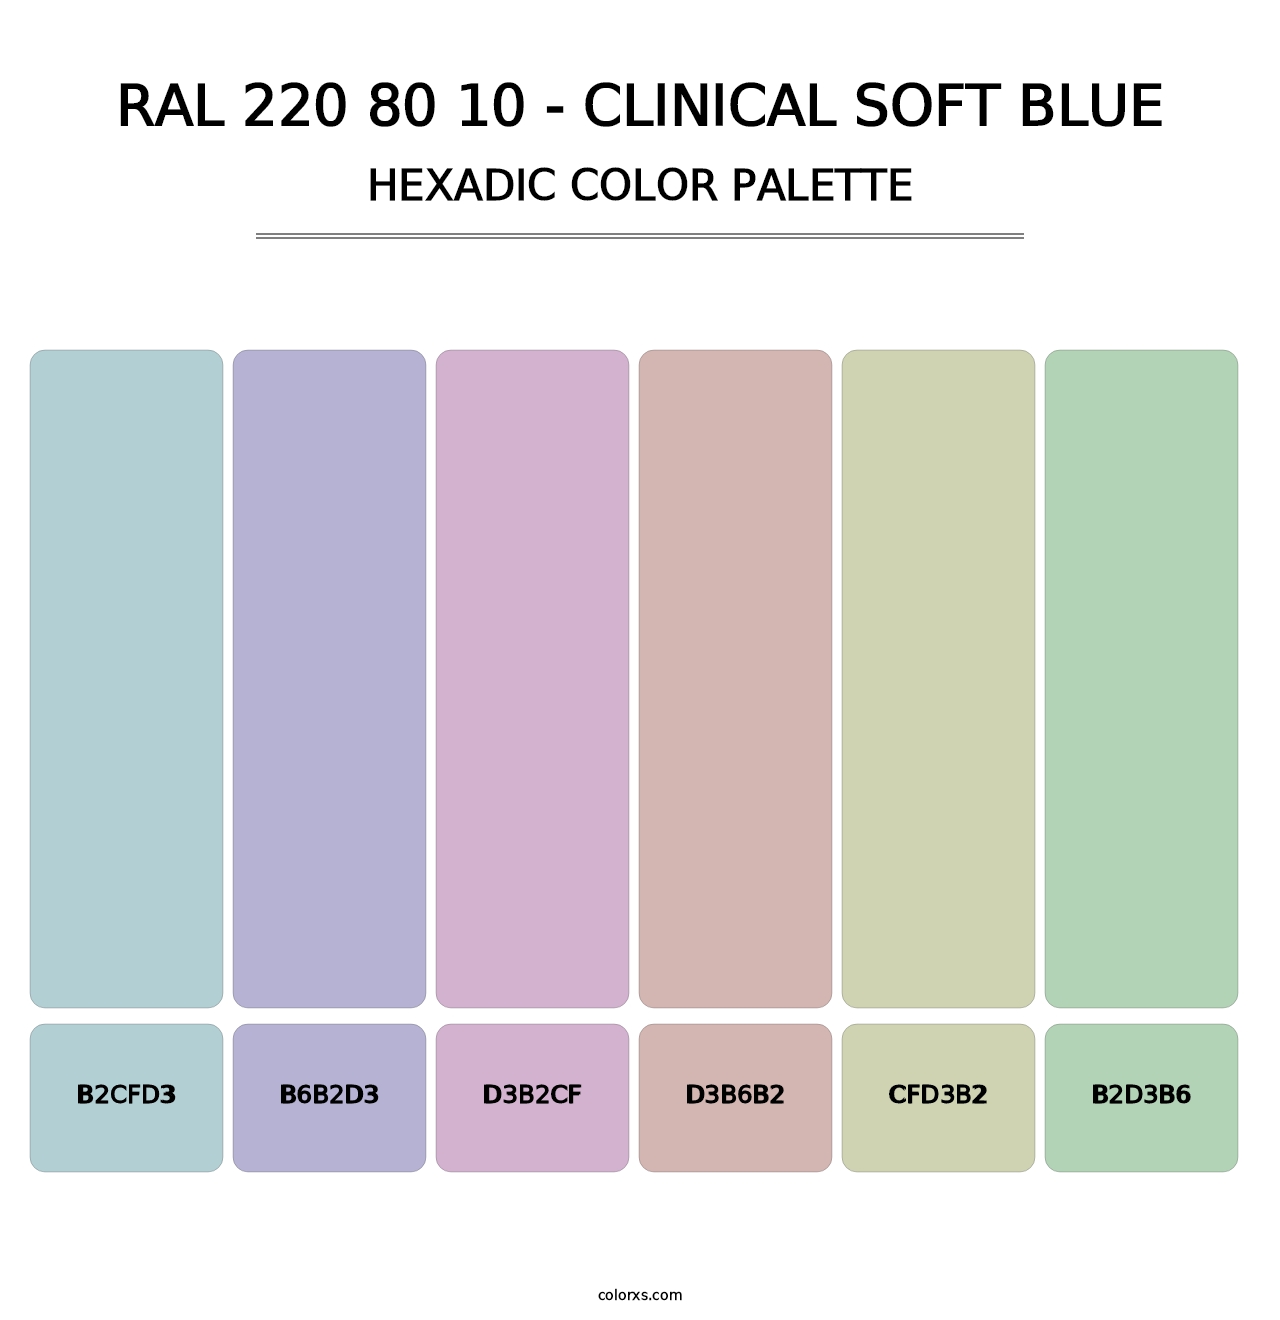 RAL 220 80 10 - Clinical Soft Blue - Hexadic Color Palette